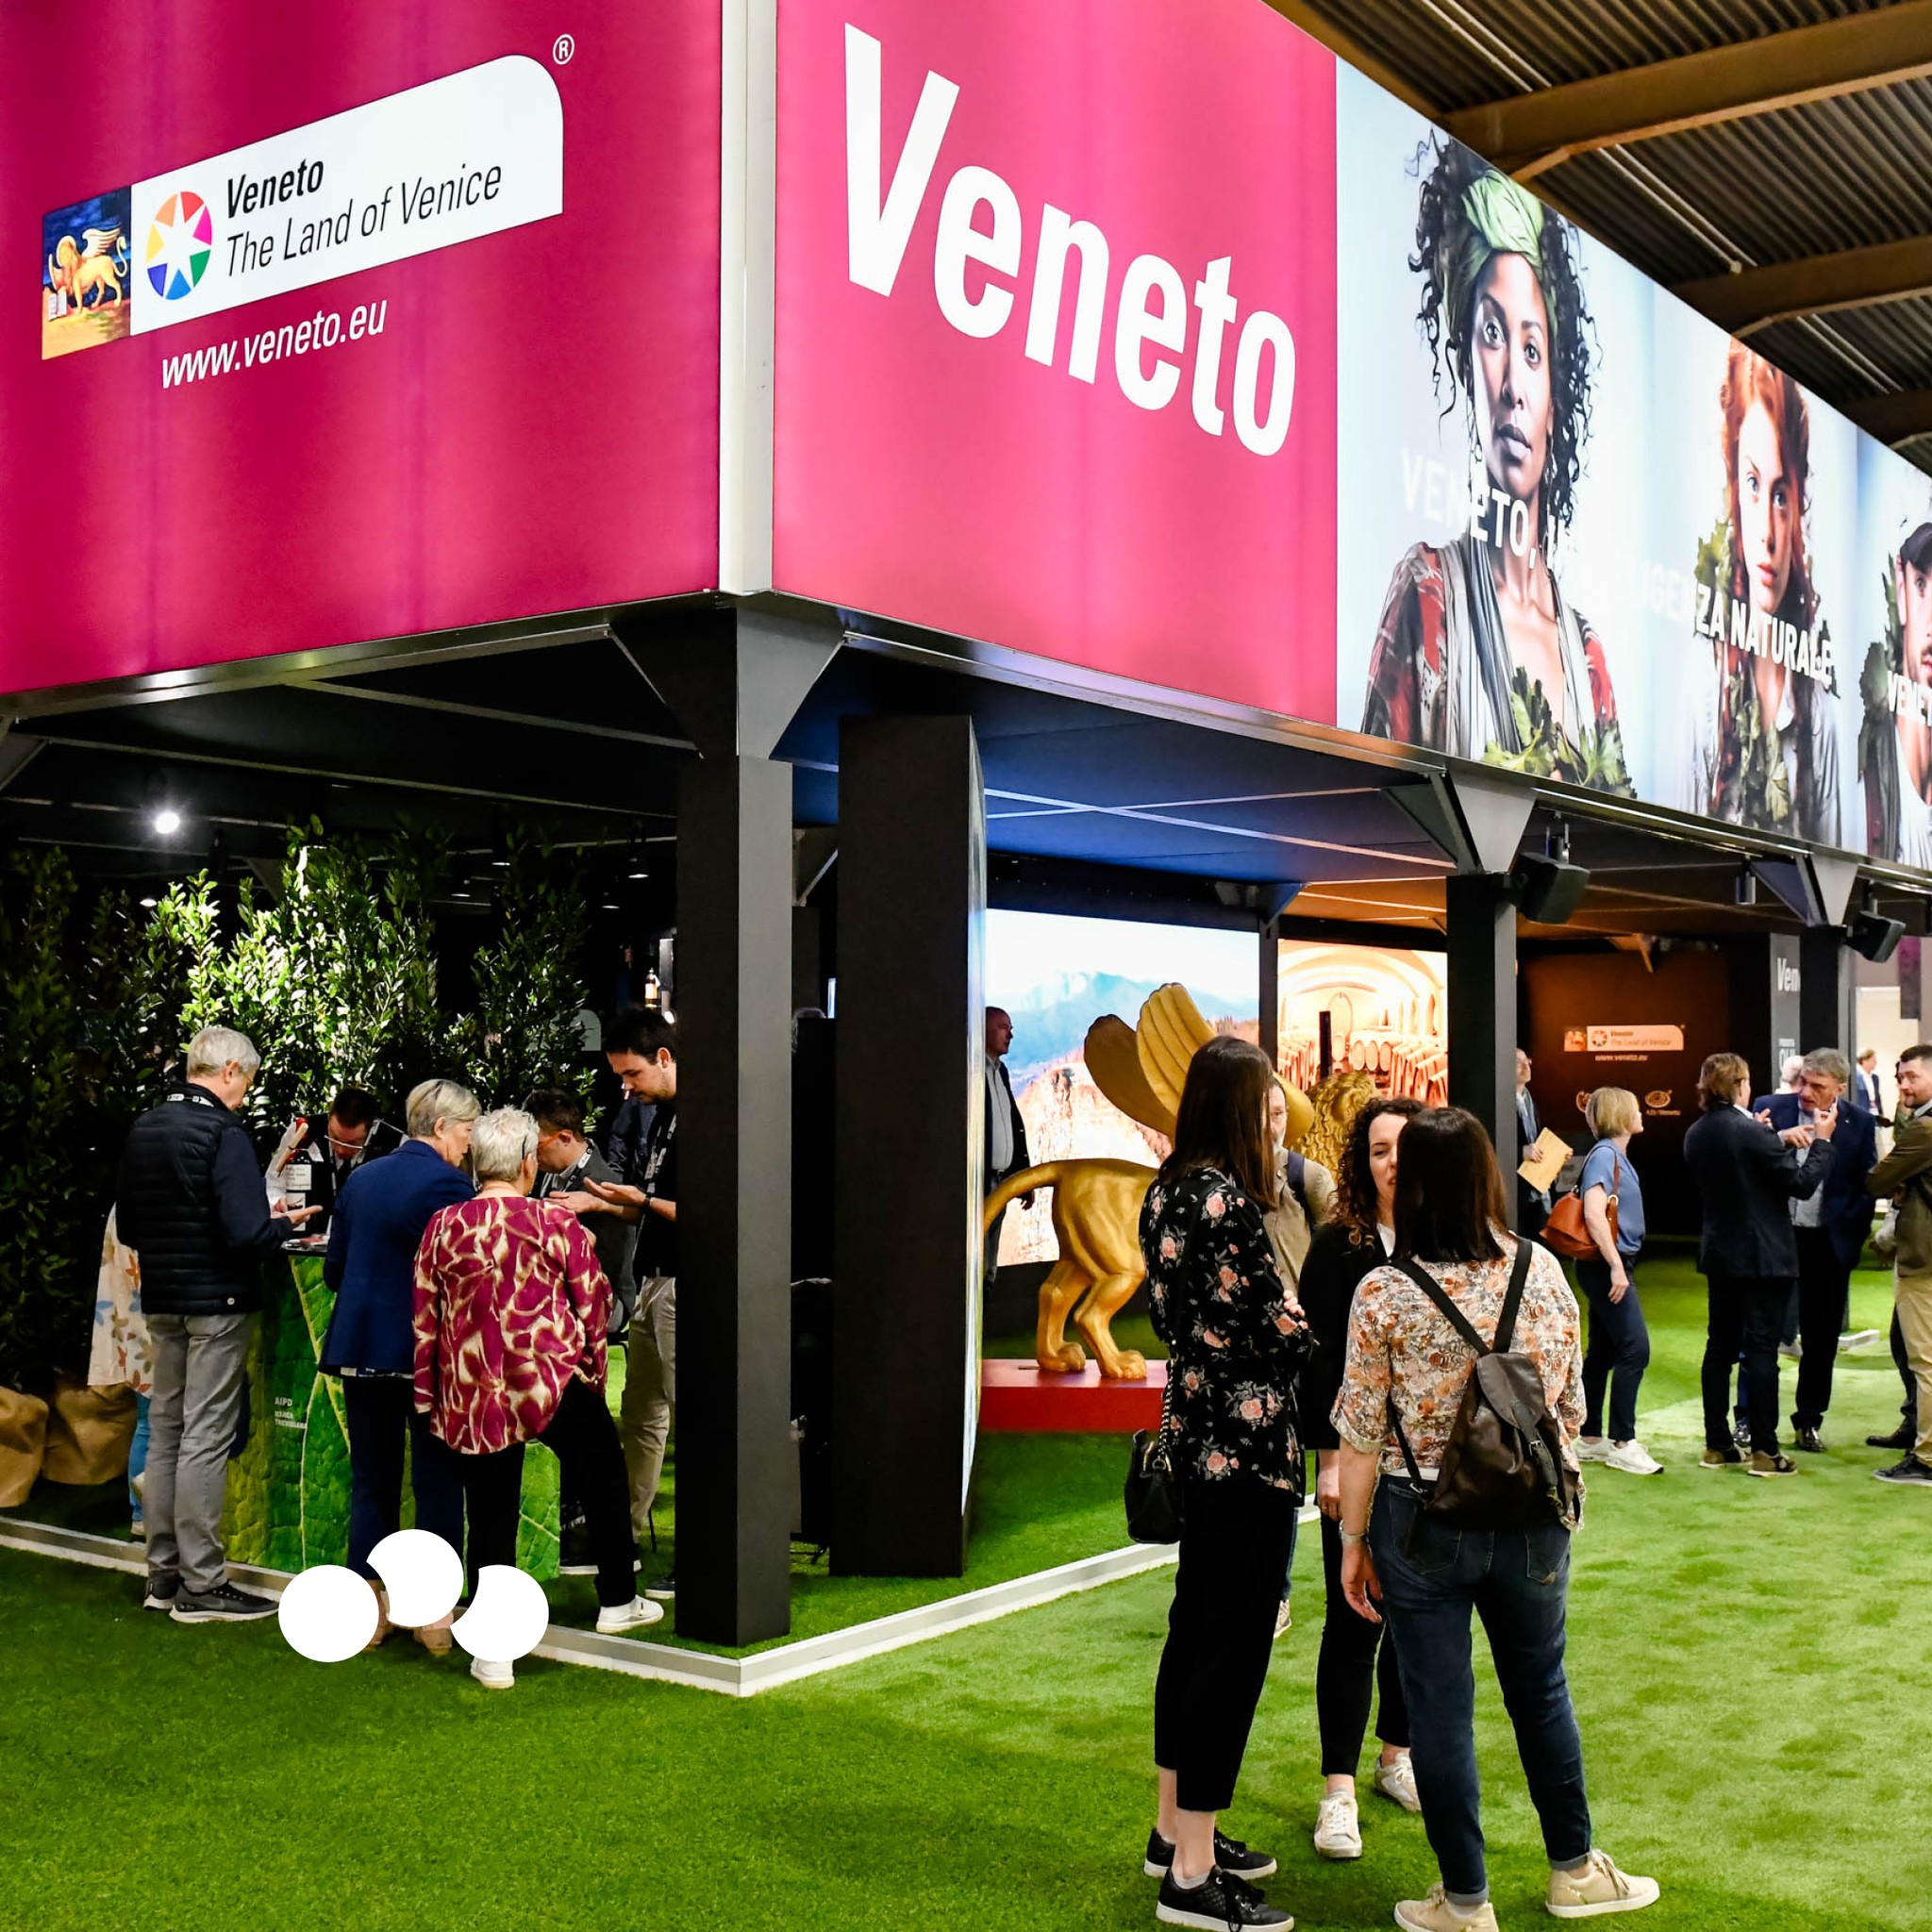 Wine & Vinitaly: without wine Italy would lose 1.1% of gdp and annual revenue for the country of 45.2 billion euros